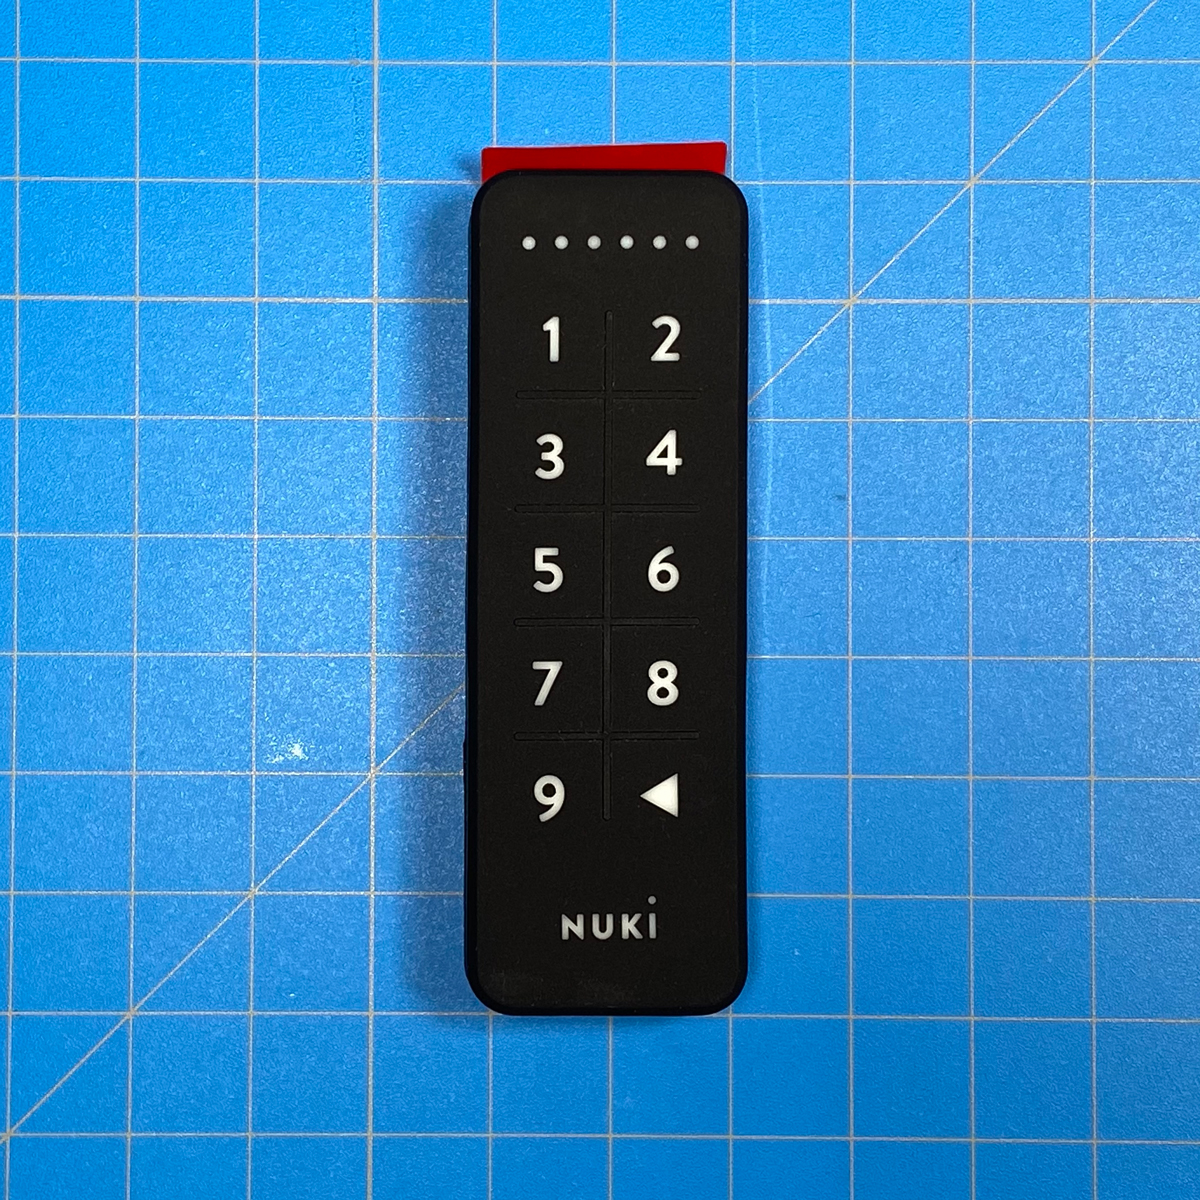 Nuki - You've never unlocked your door this quickly before. Thanks, Nuki  Keypad 2.0. Want to know more?